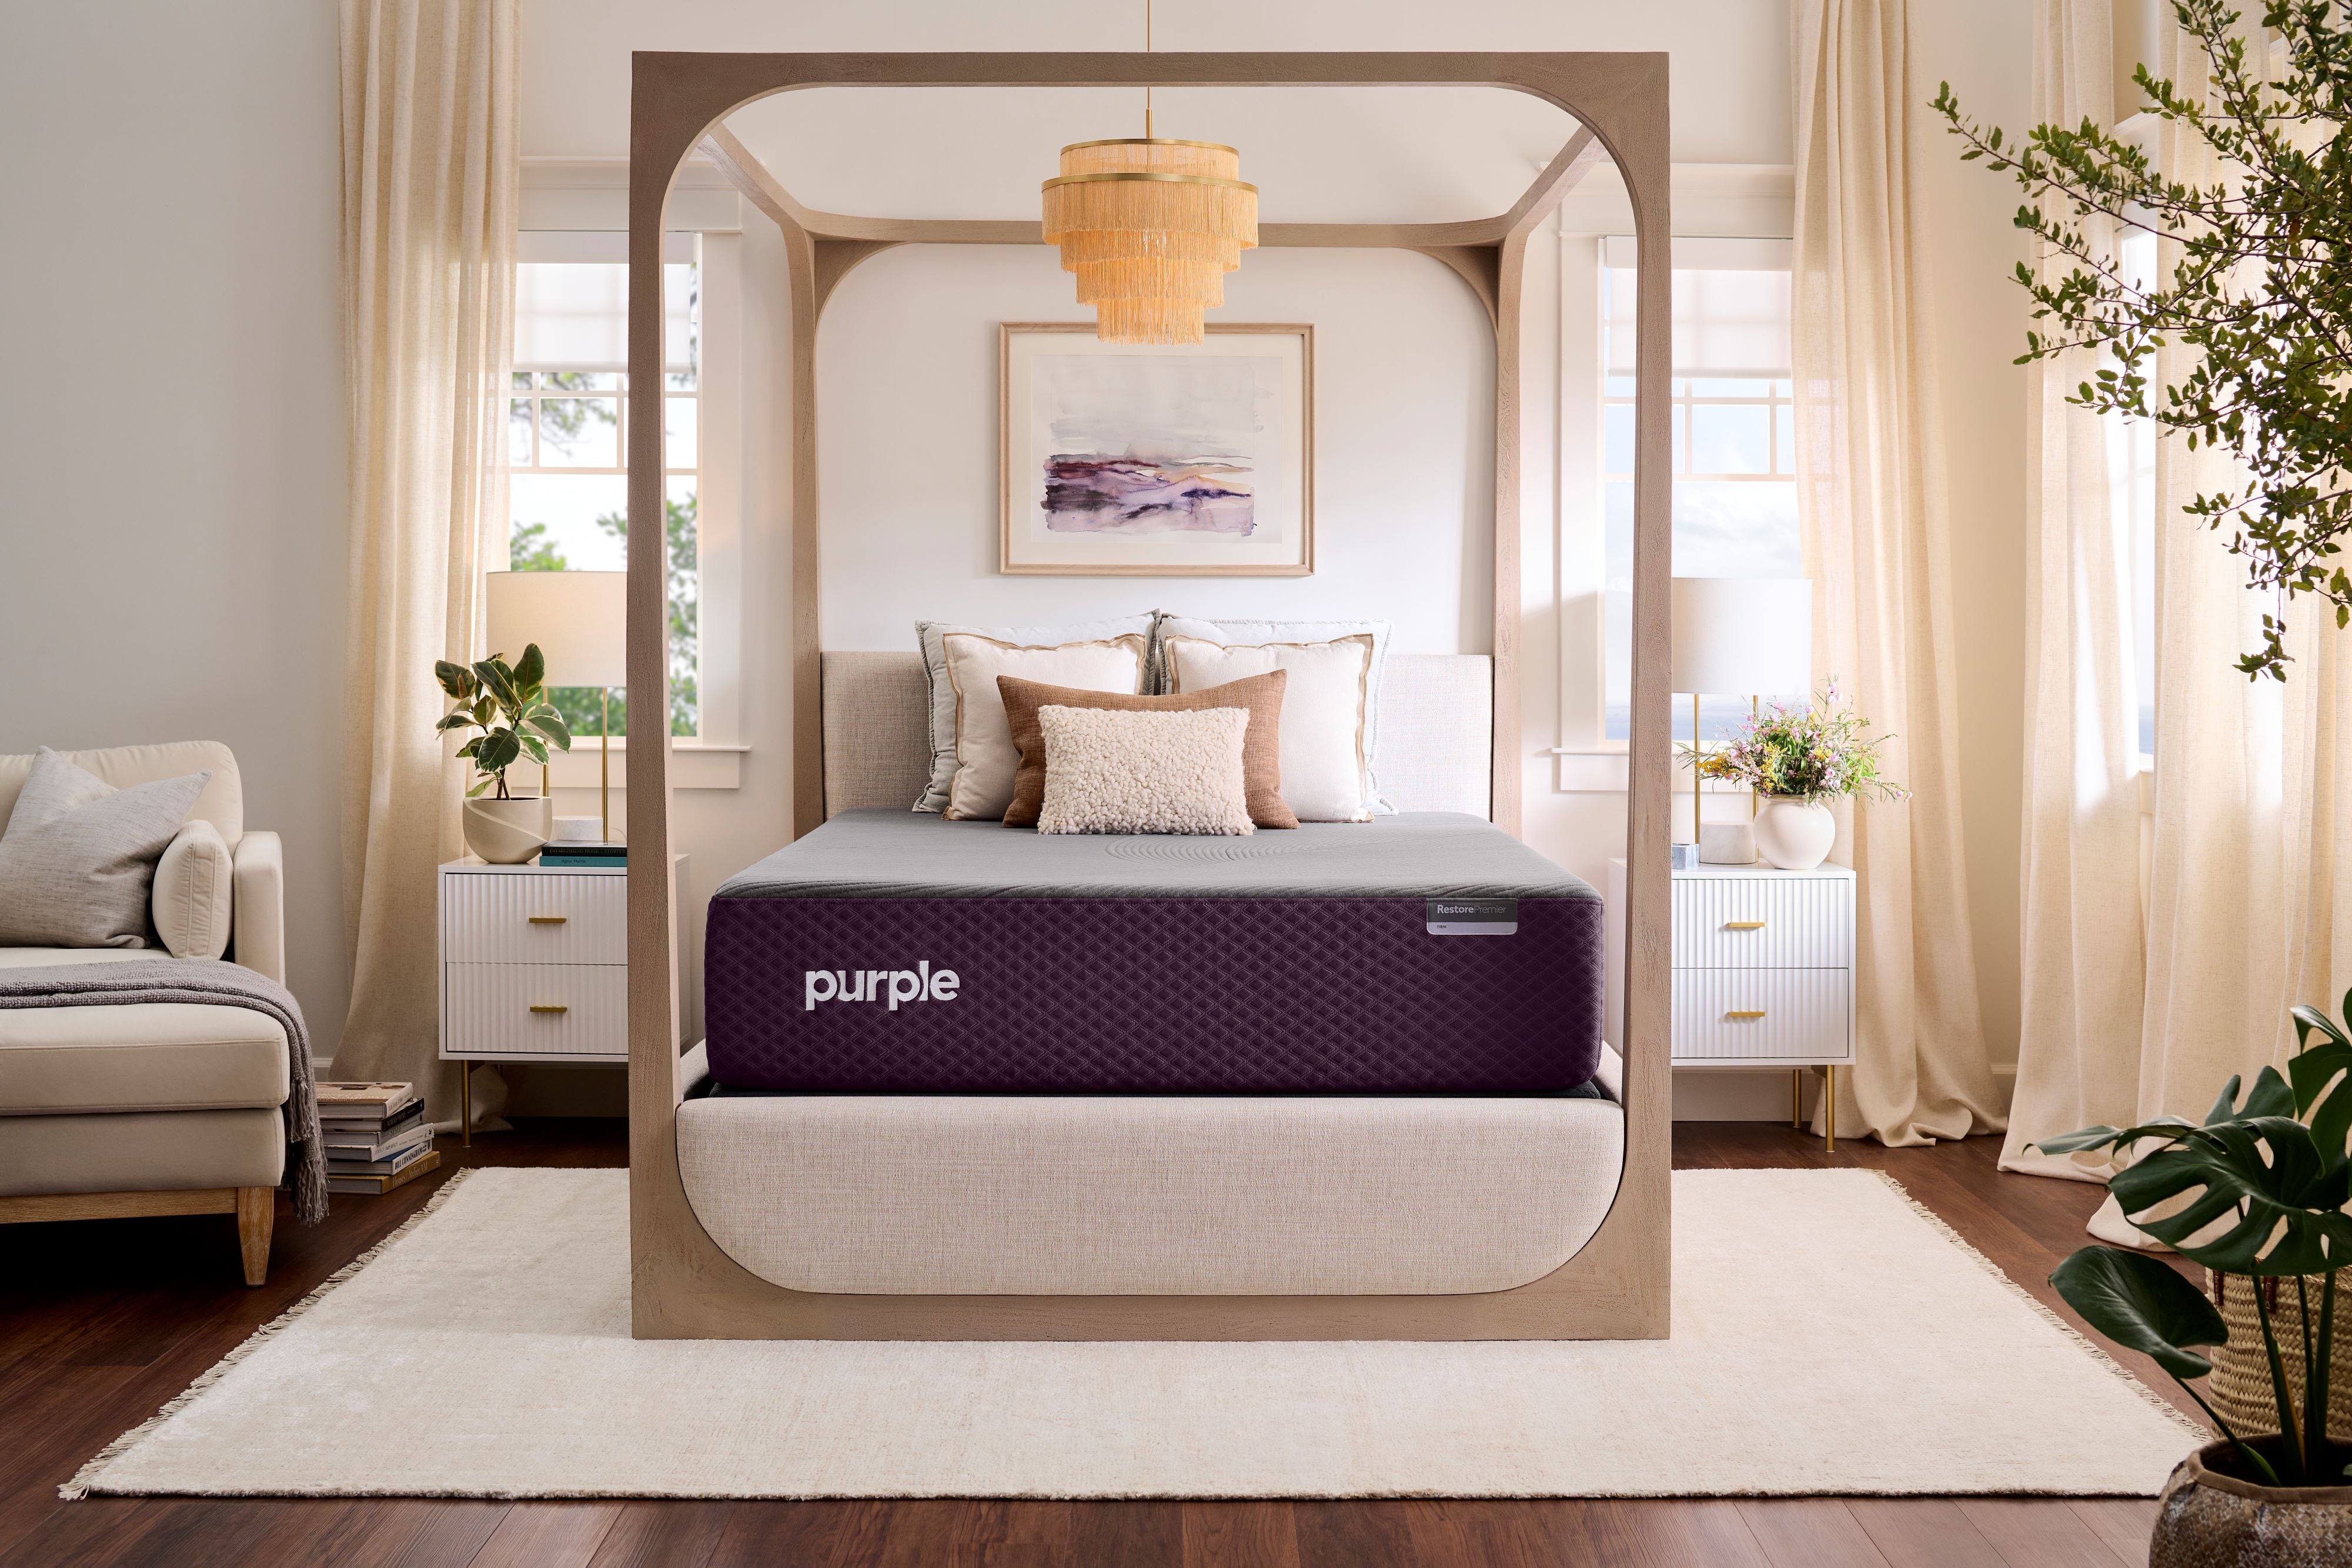 Purple Premium Restore Premiere Mattress in a beautiful room seen from the front